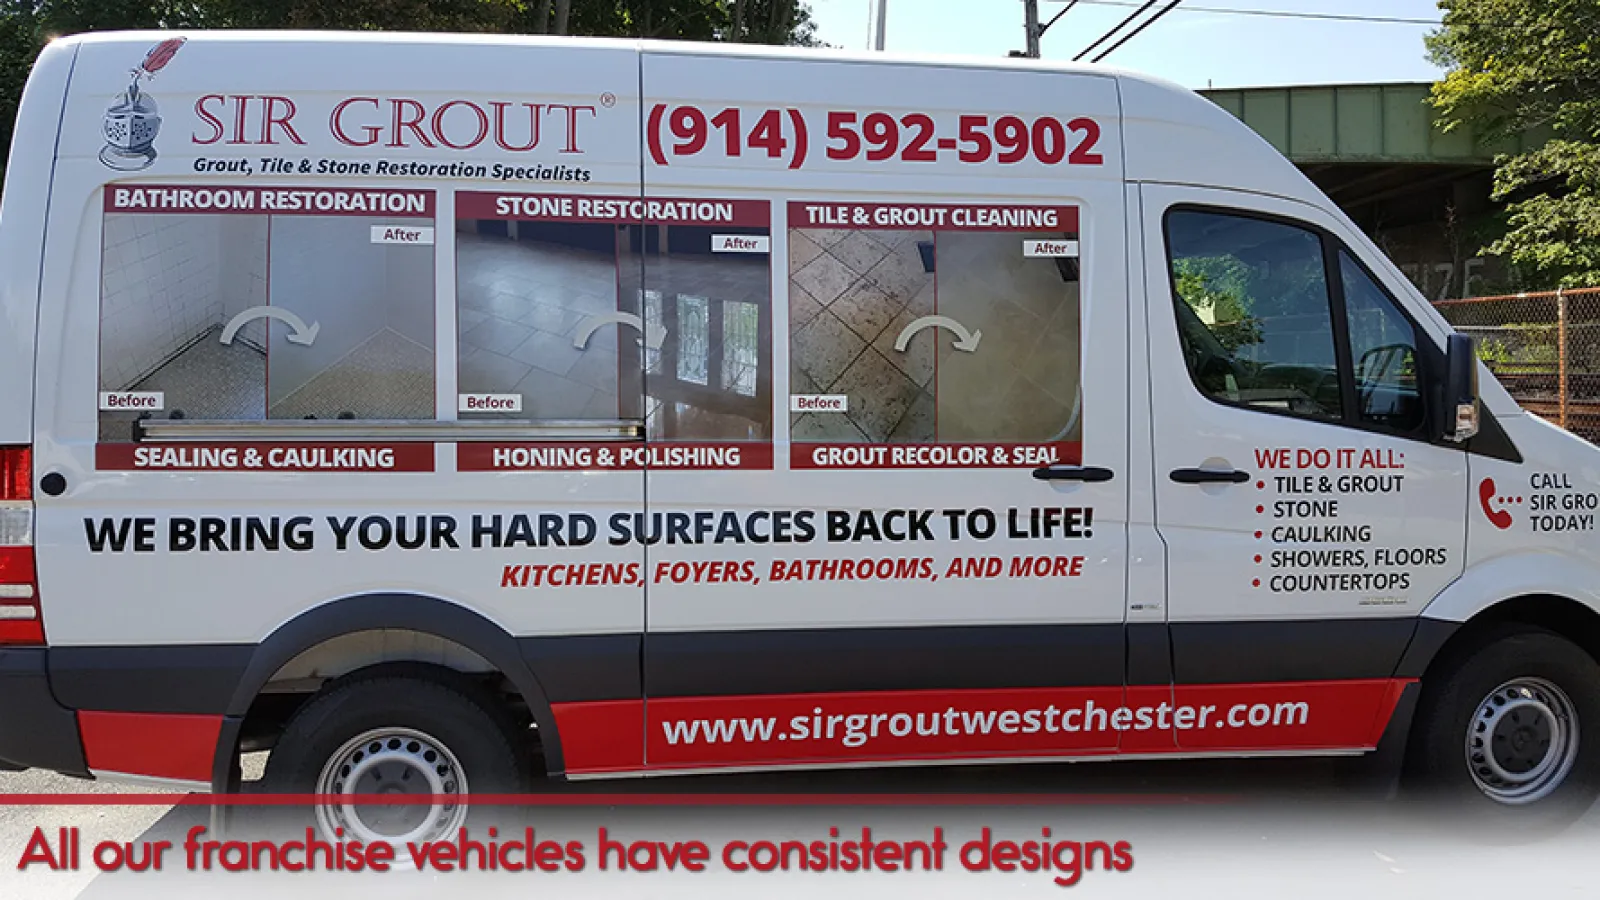 How to Develop a Successful Franchise Brand Like Sir Grout